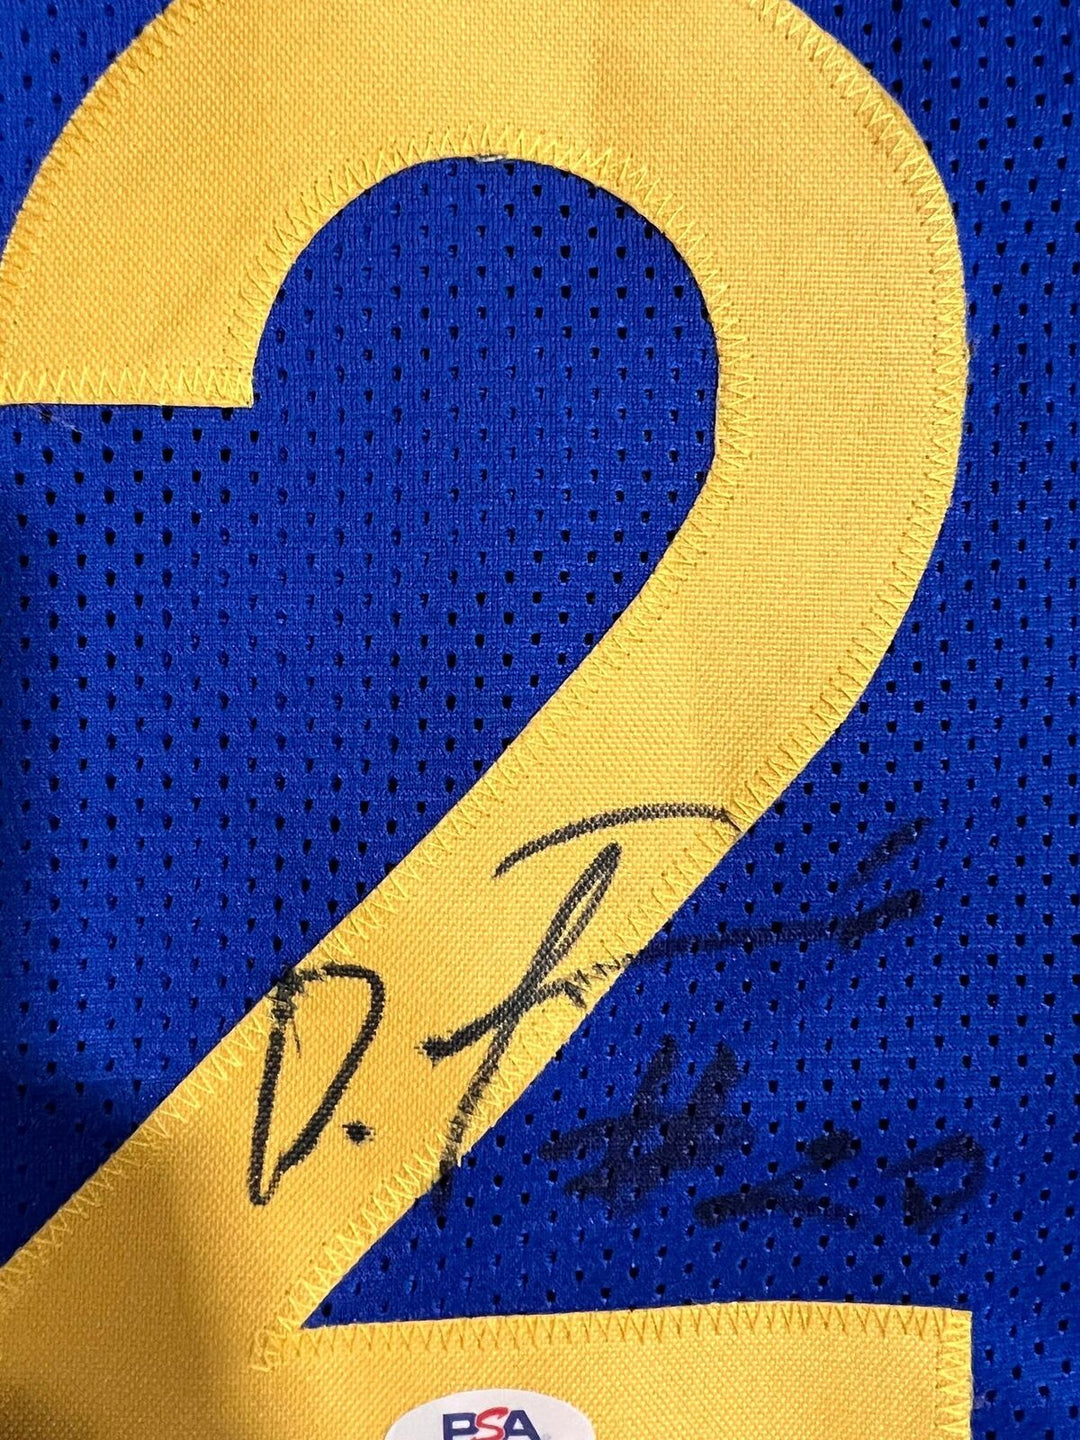 Dario Saric signed jersey PSA/DNA Golden State Warriors Autographed Image 2